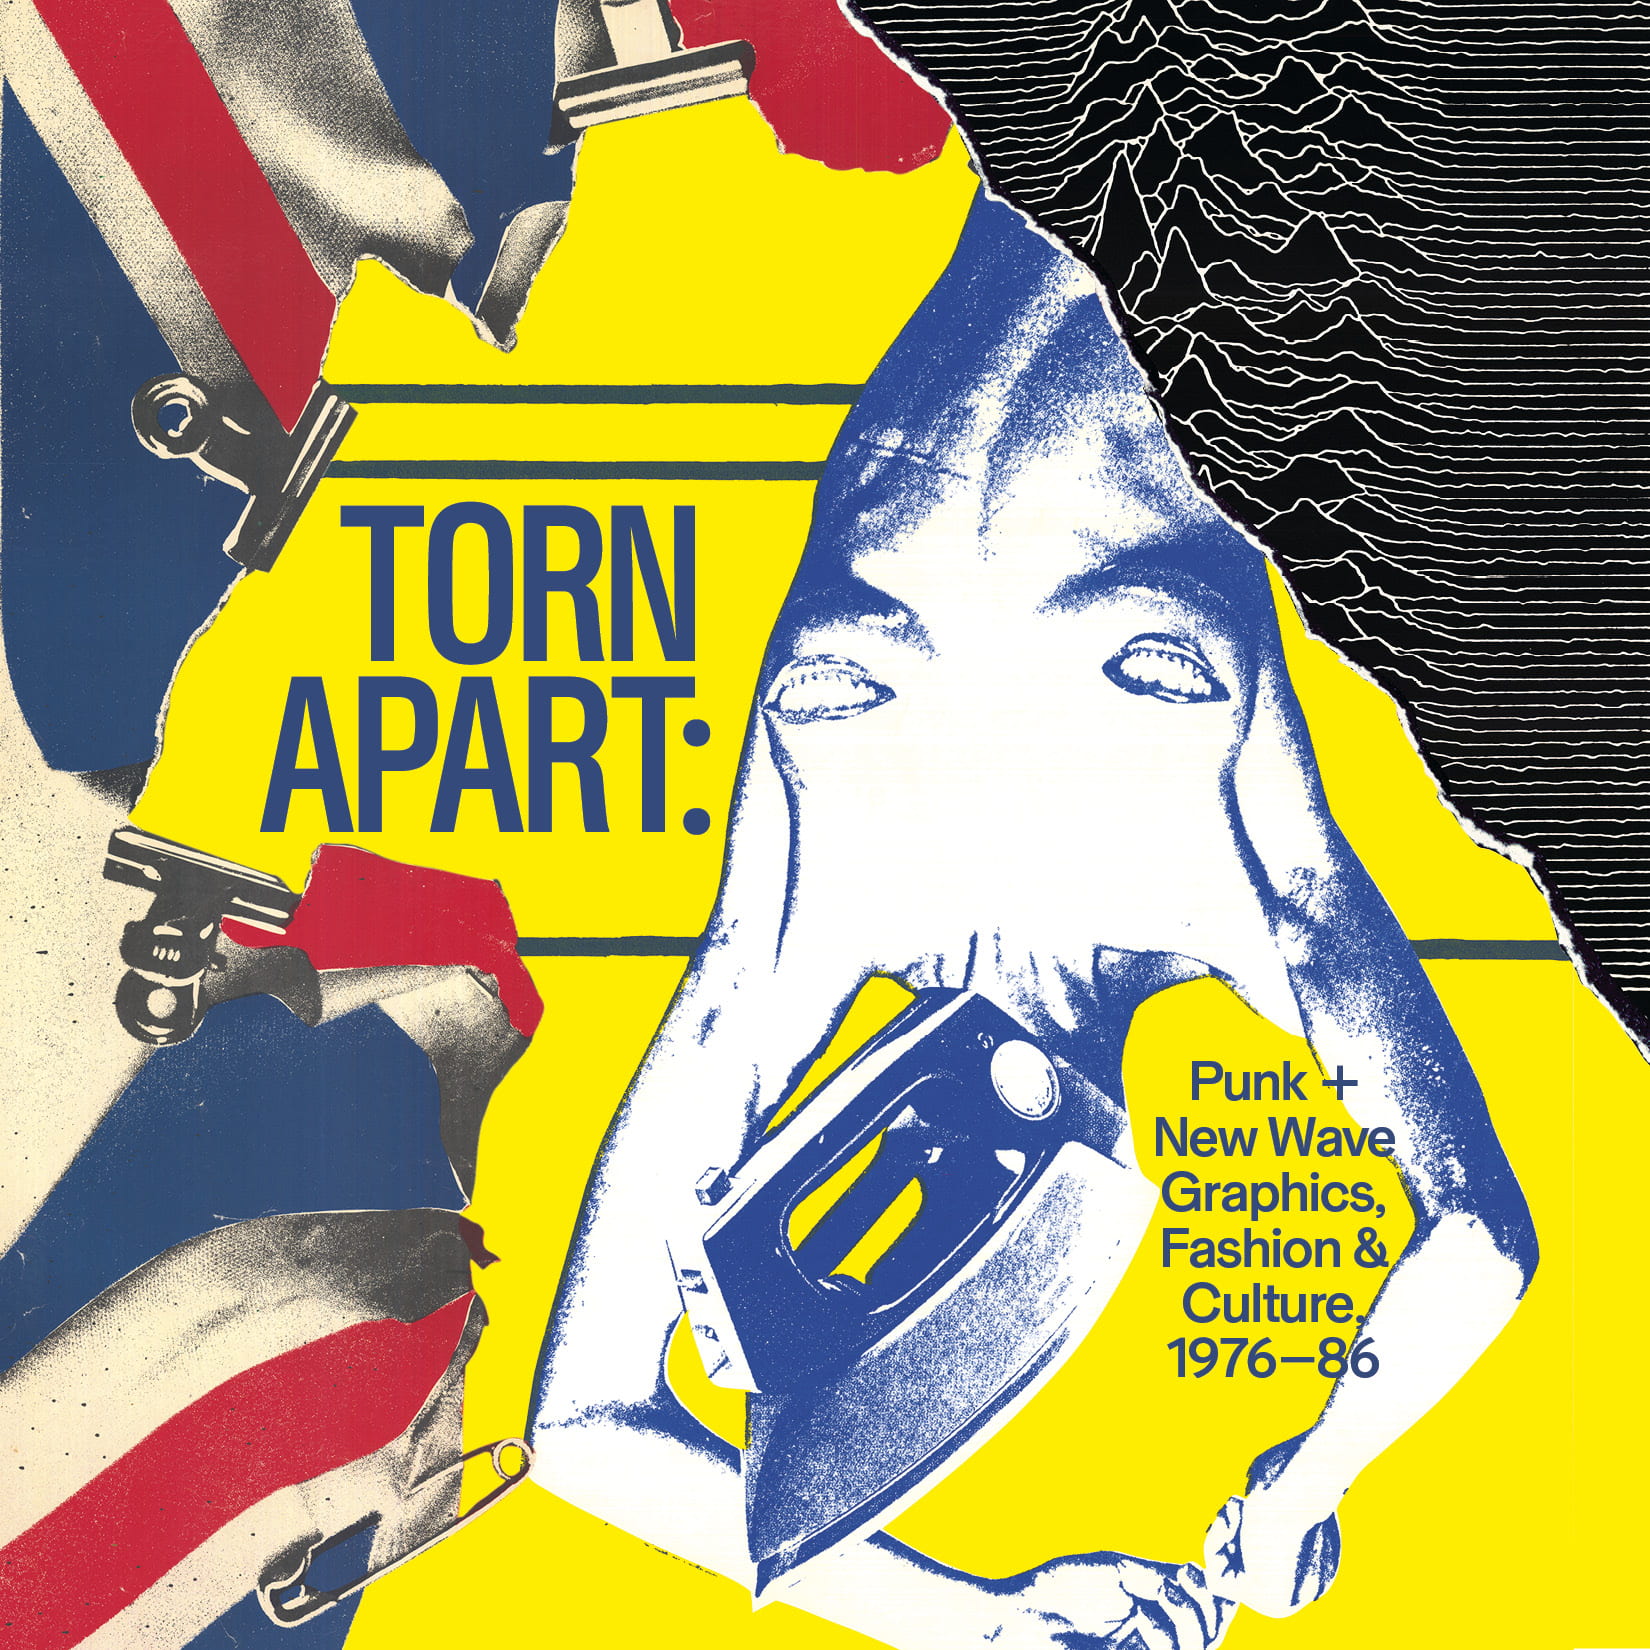 Promo image for exhibition, Torn Apart